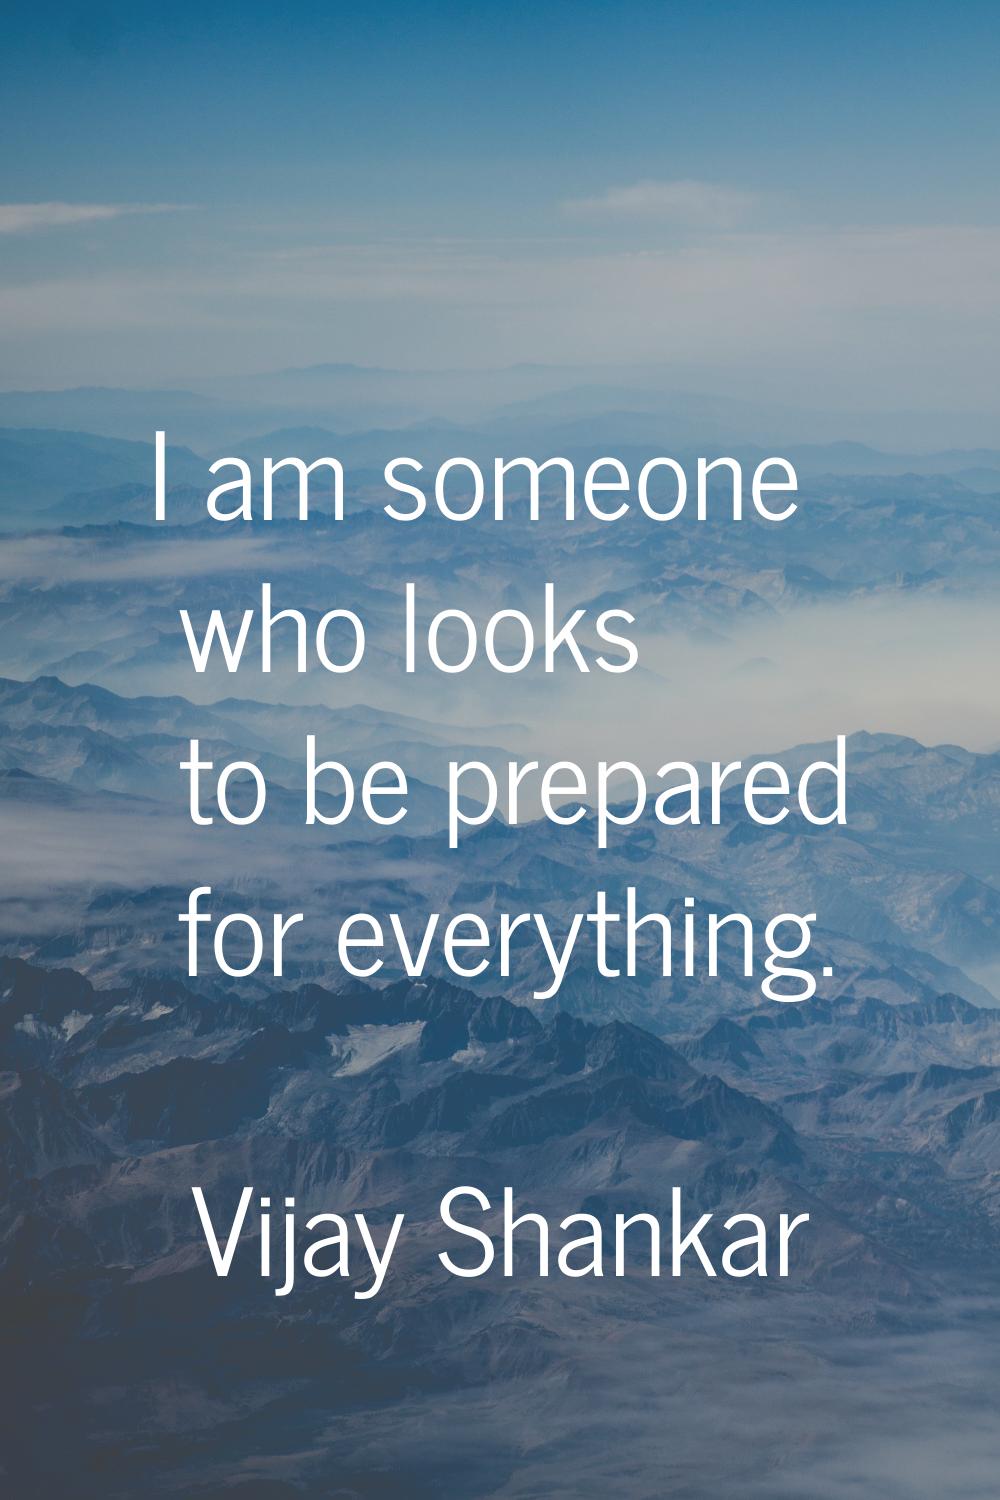 I am someone who looks to be prepared for everything.